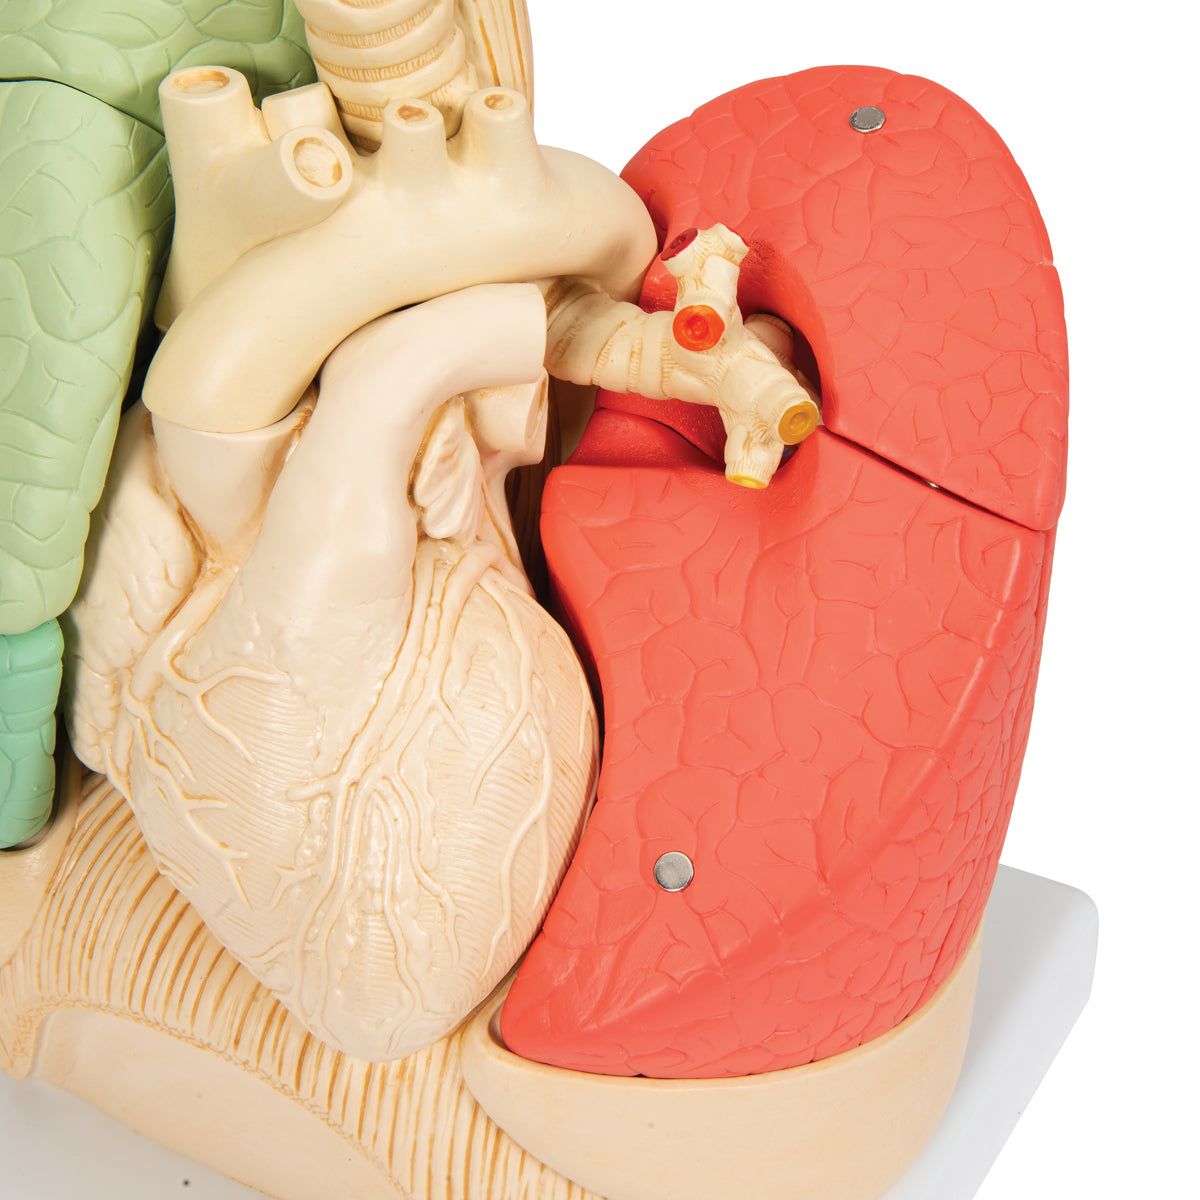 Lung model with heart and bronchi, divided into segments